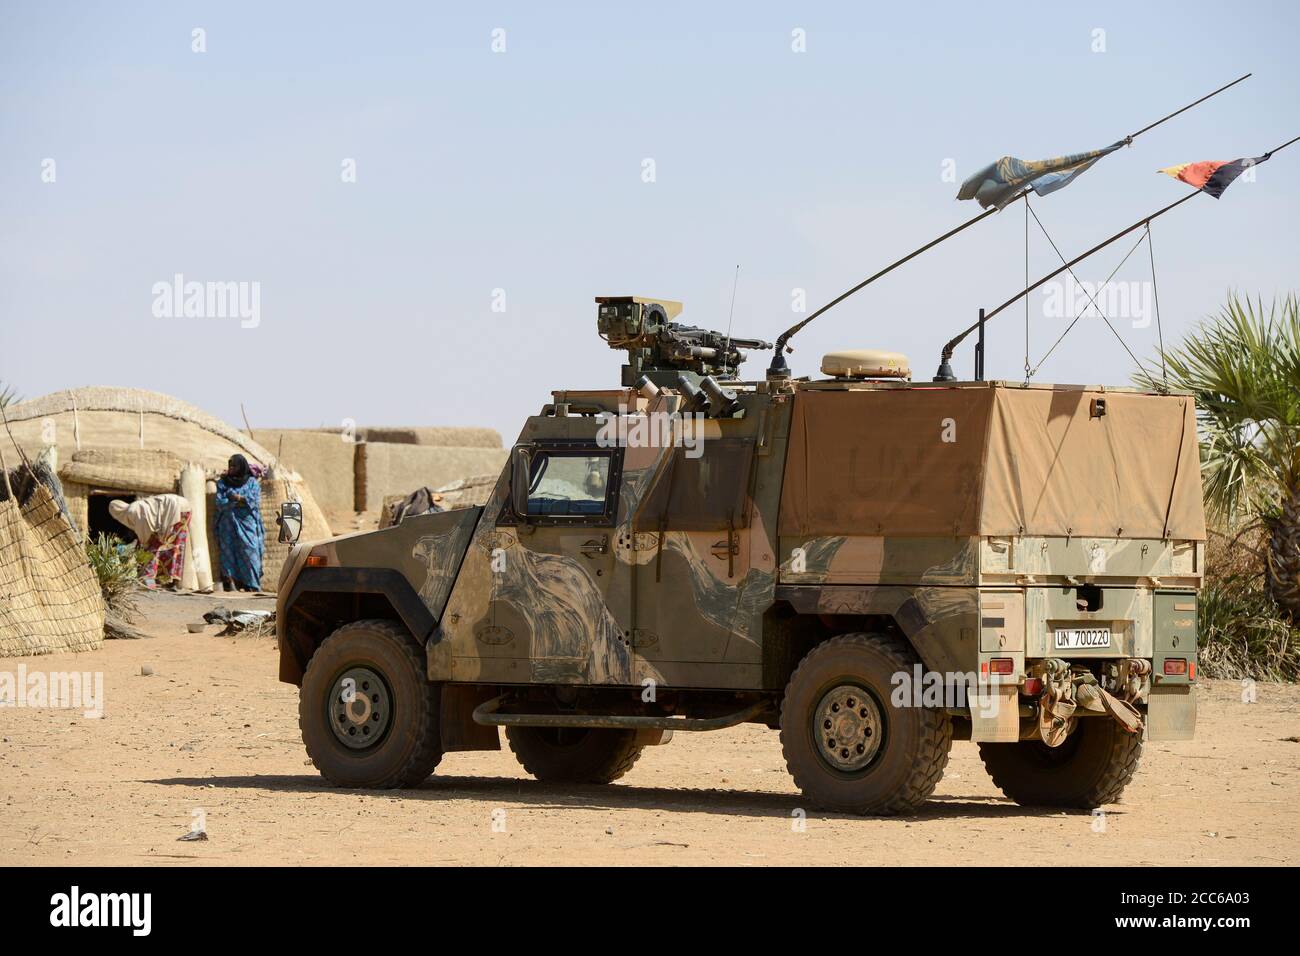 MALI, Gao, Minusma UN peace keeping mission, Camp Castor, german army  Bundeswehr, patrol with Eagle Mowag armored vehicle in village BAGOUNDJÉ  Stock Photo - Alamy